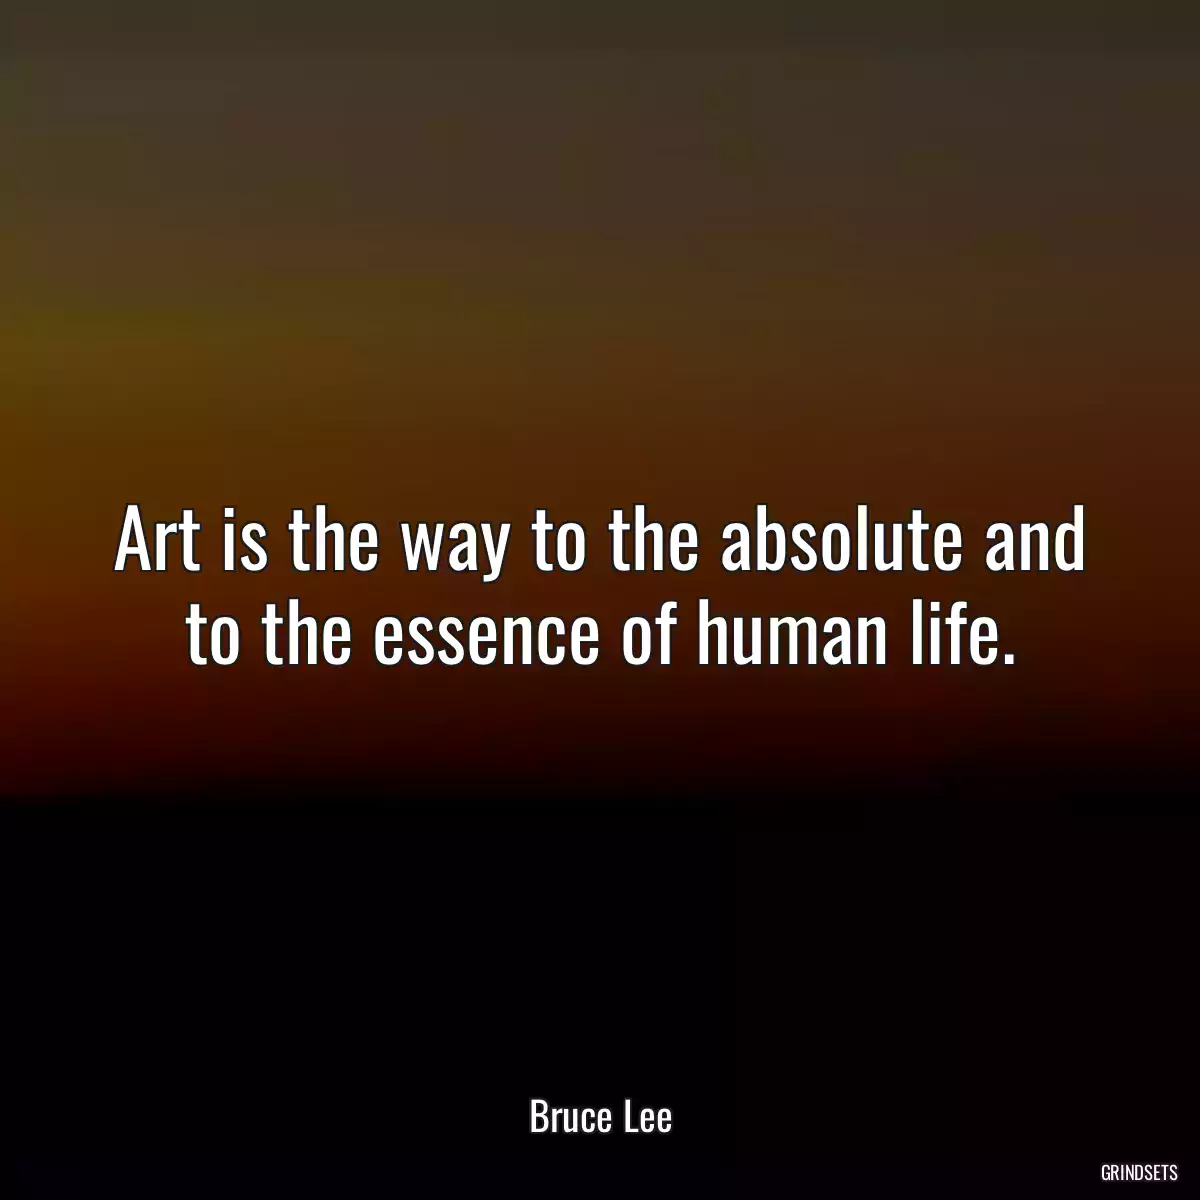 Art is the way to the absolute and to the essence of human life.